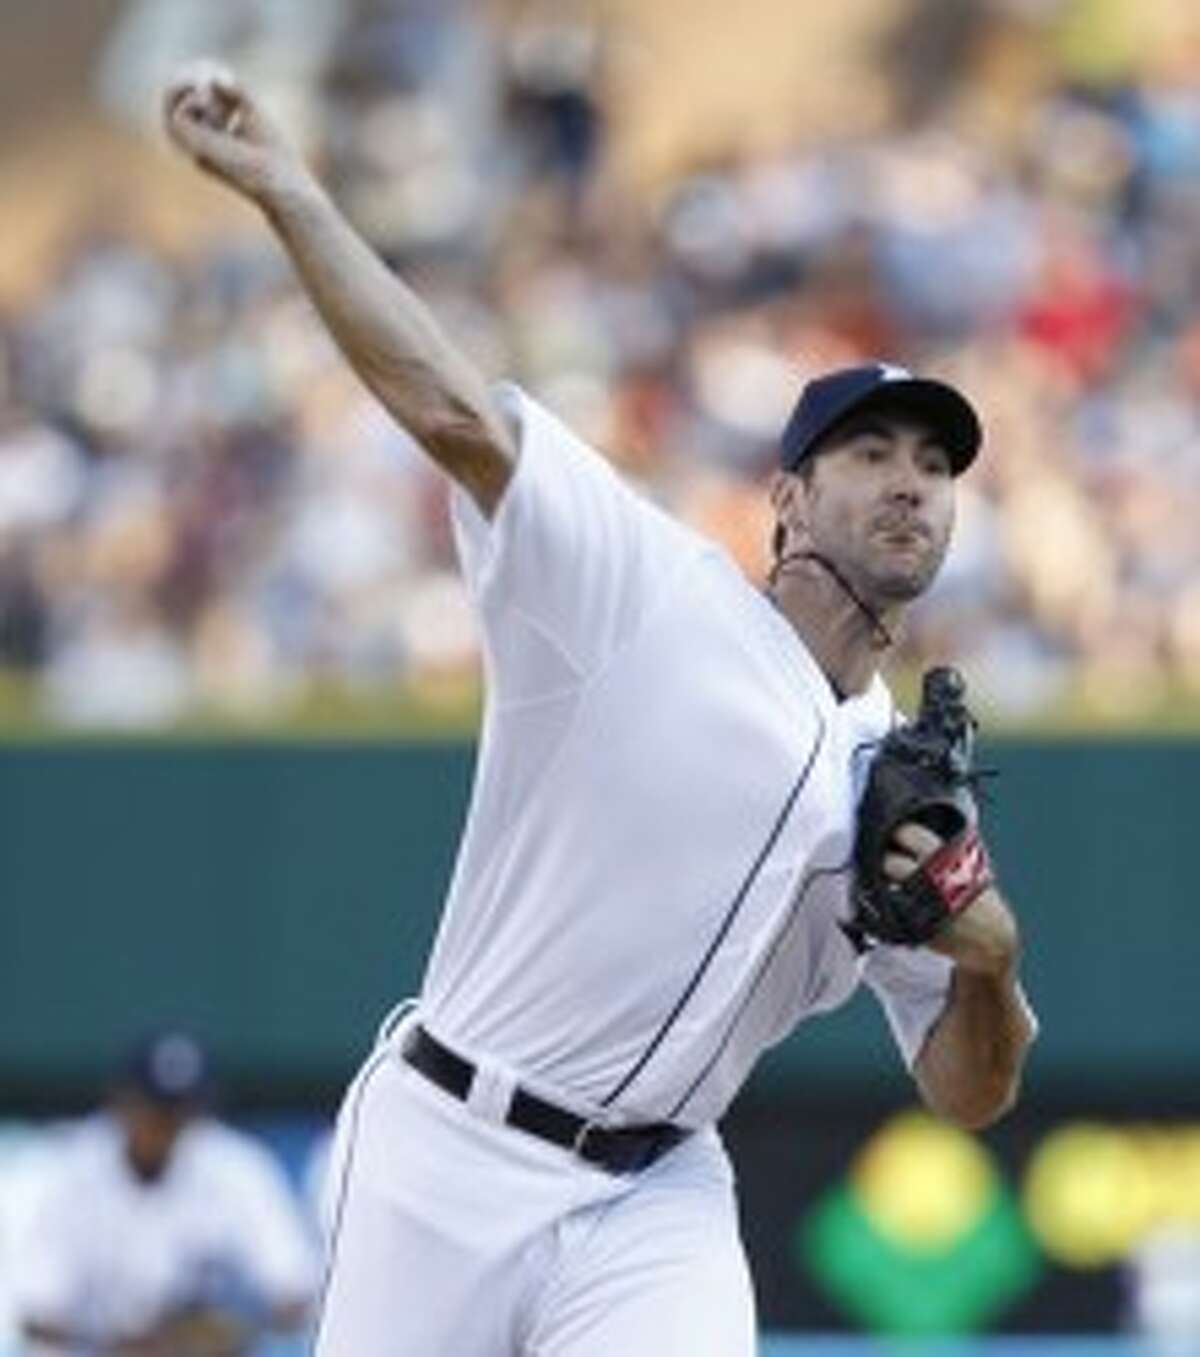 Tigers starter Justin Verlander delivers a pitch during the third inning against the Chicago White Sox on Friday at Comerica Park in Detroit. (Julian H. Gonzalez/Detroit Free Press/MCT)